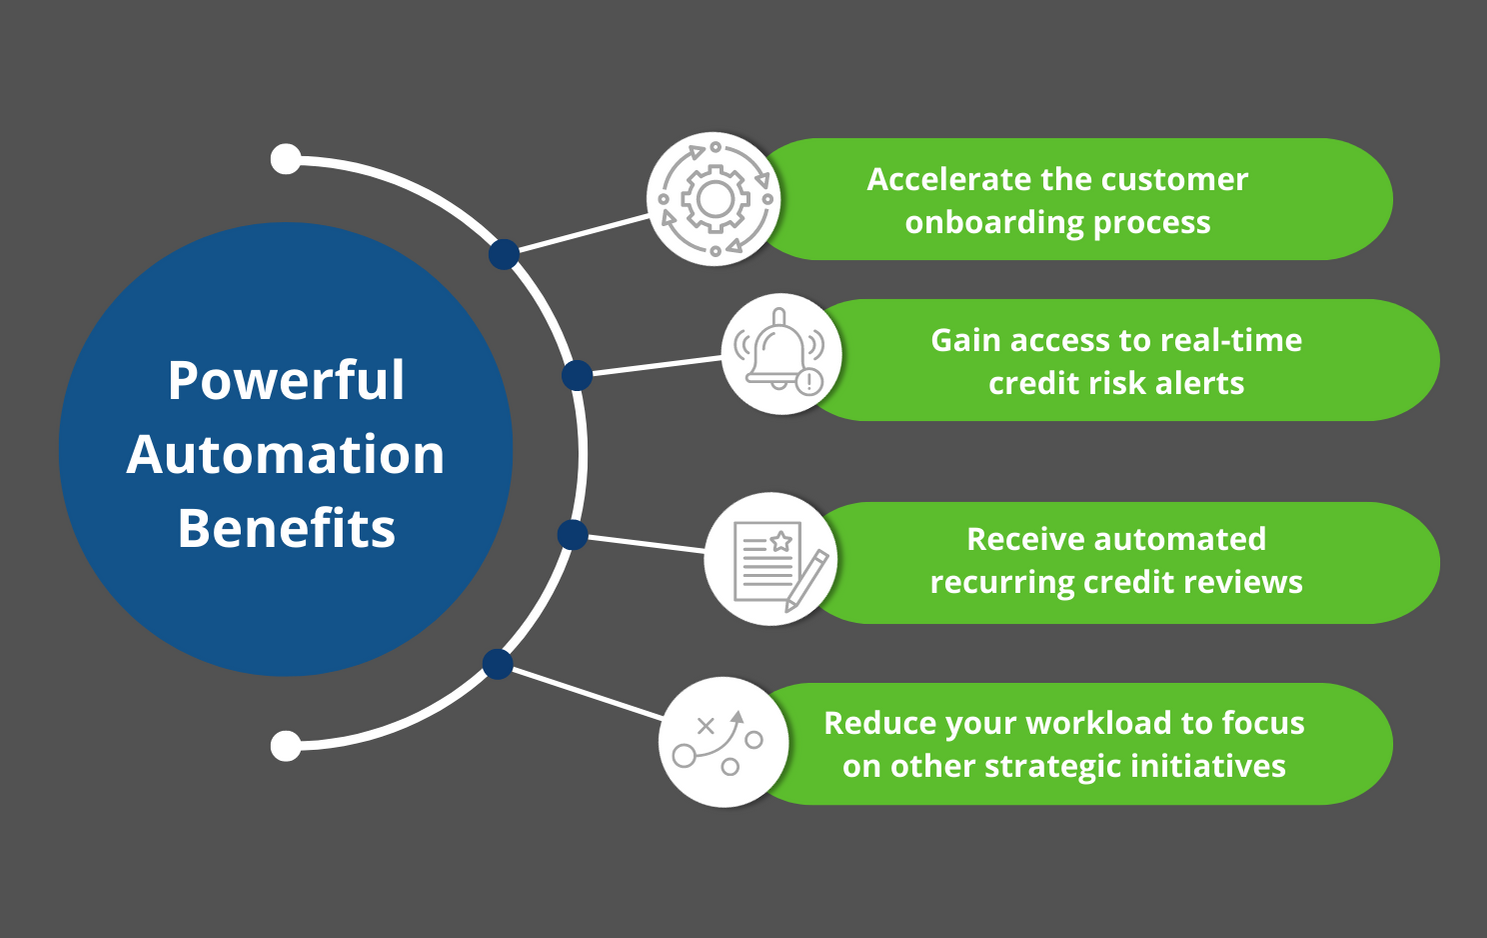 The benefits of automating credit processes